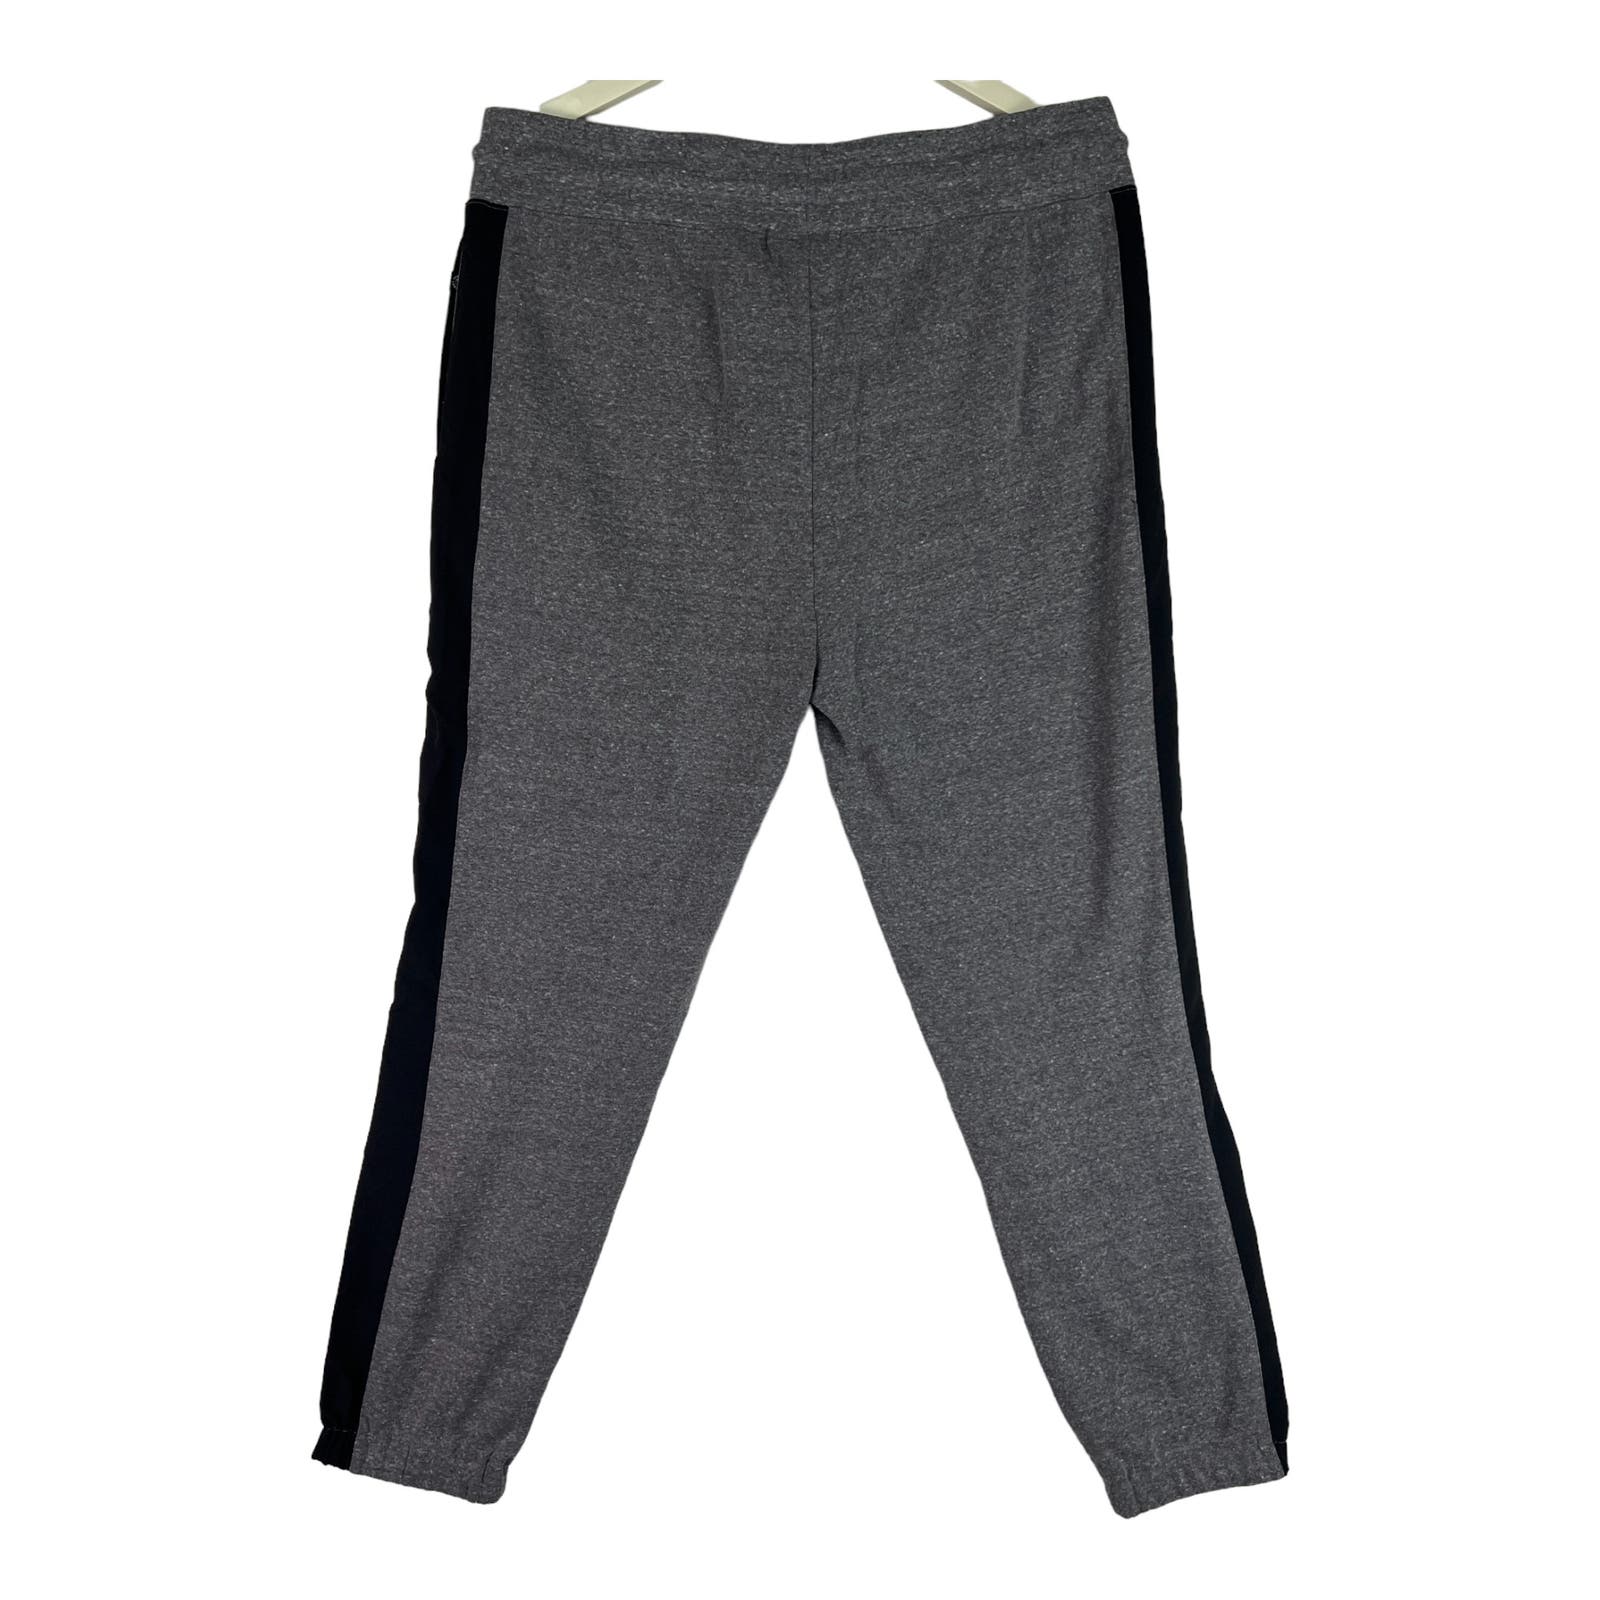 Threads For Throught Men Grey Pants  US XL Casual Sport Sweatpants